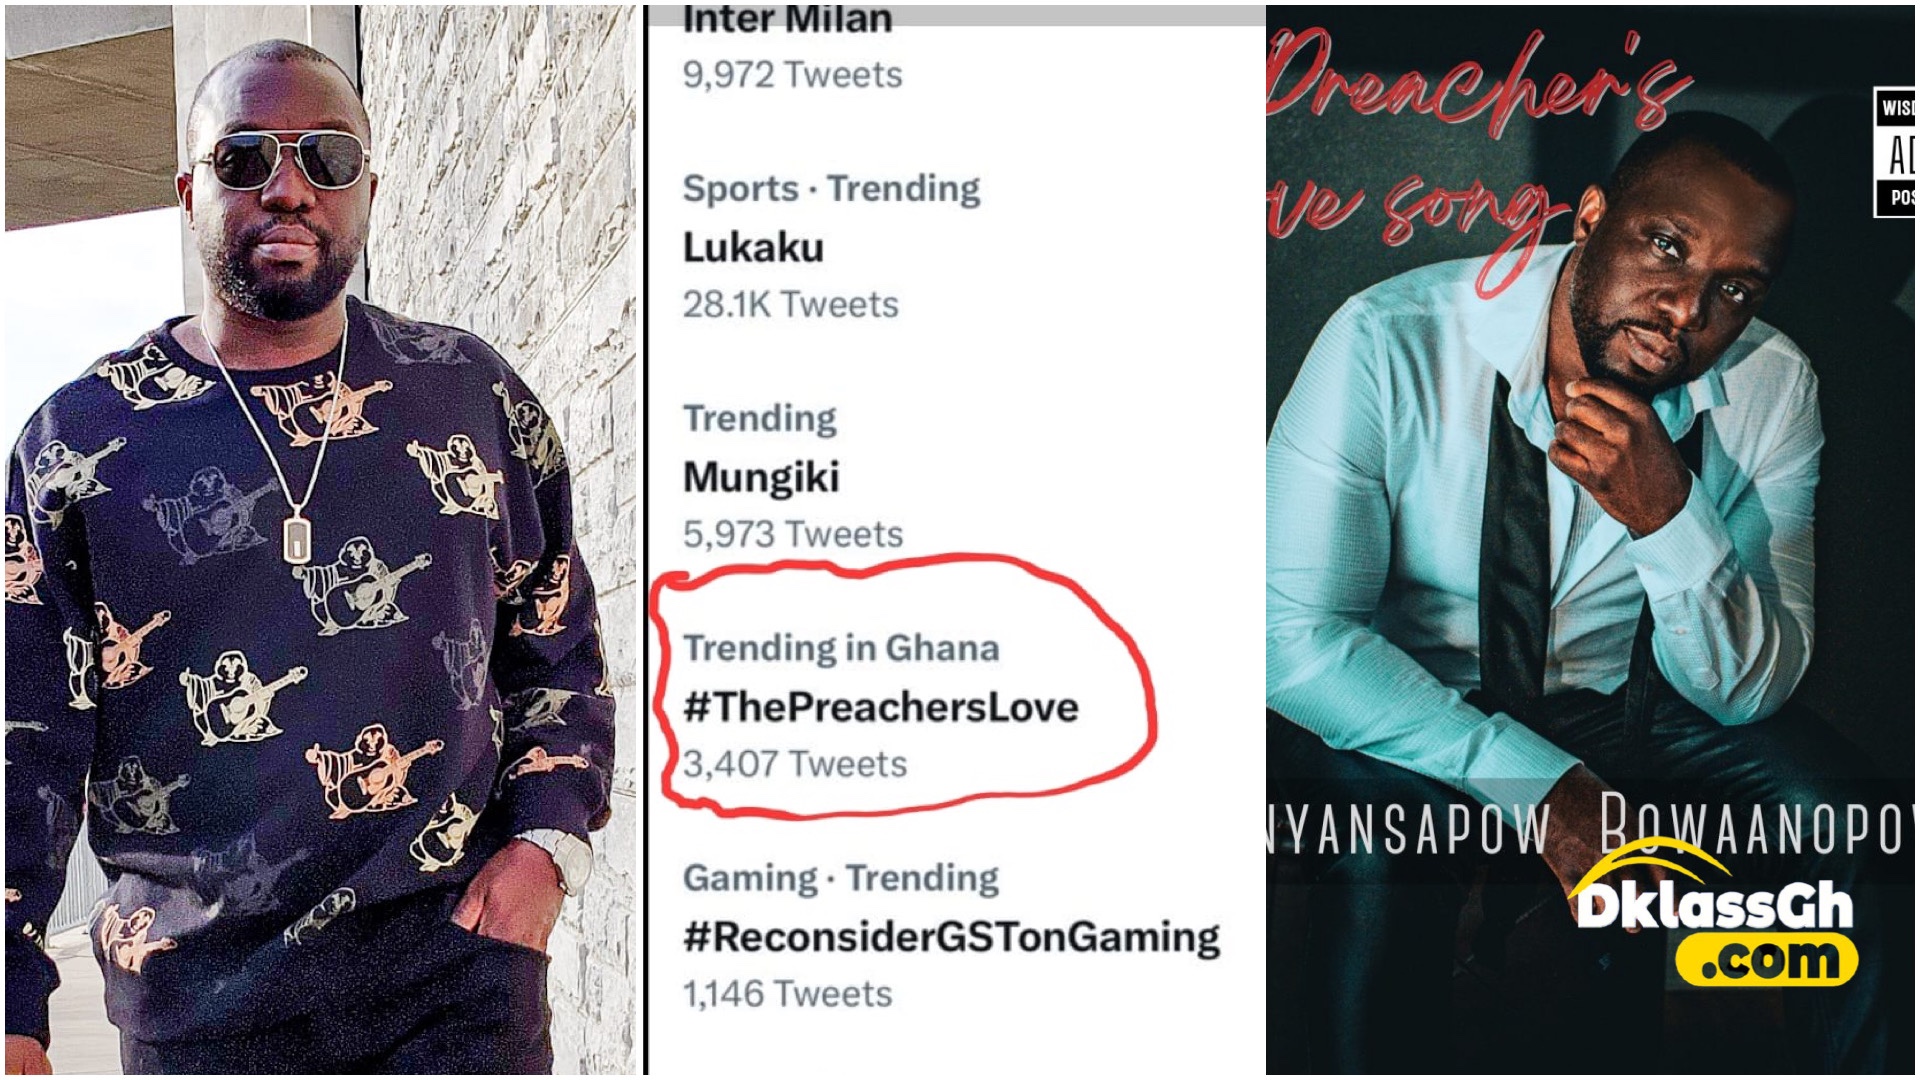 Onyansapow Bowaanopow hits Number 4 spot on Twitter Ghana Trends with "The Preacher’s Love Song."